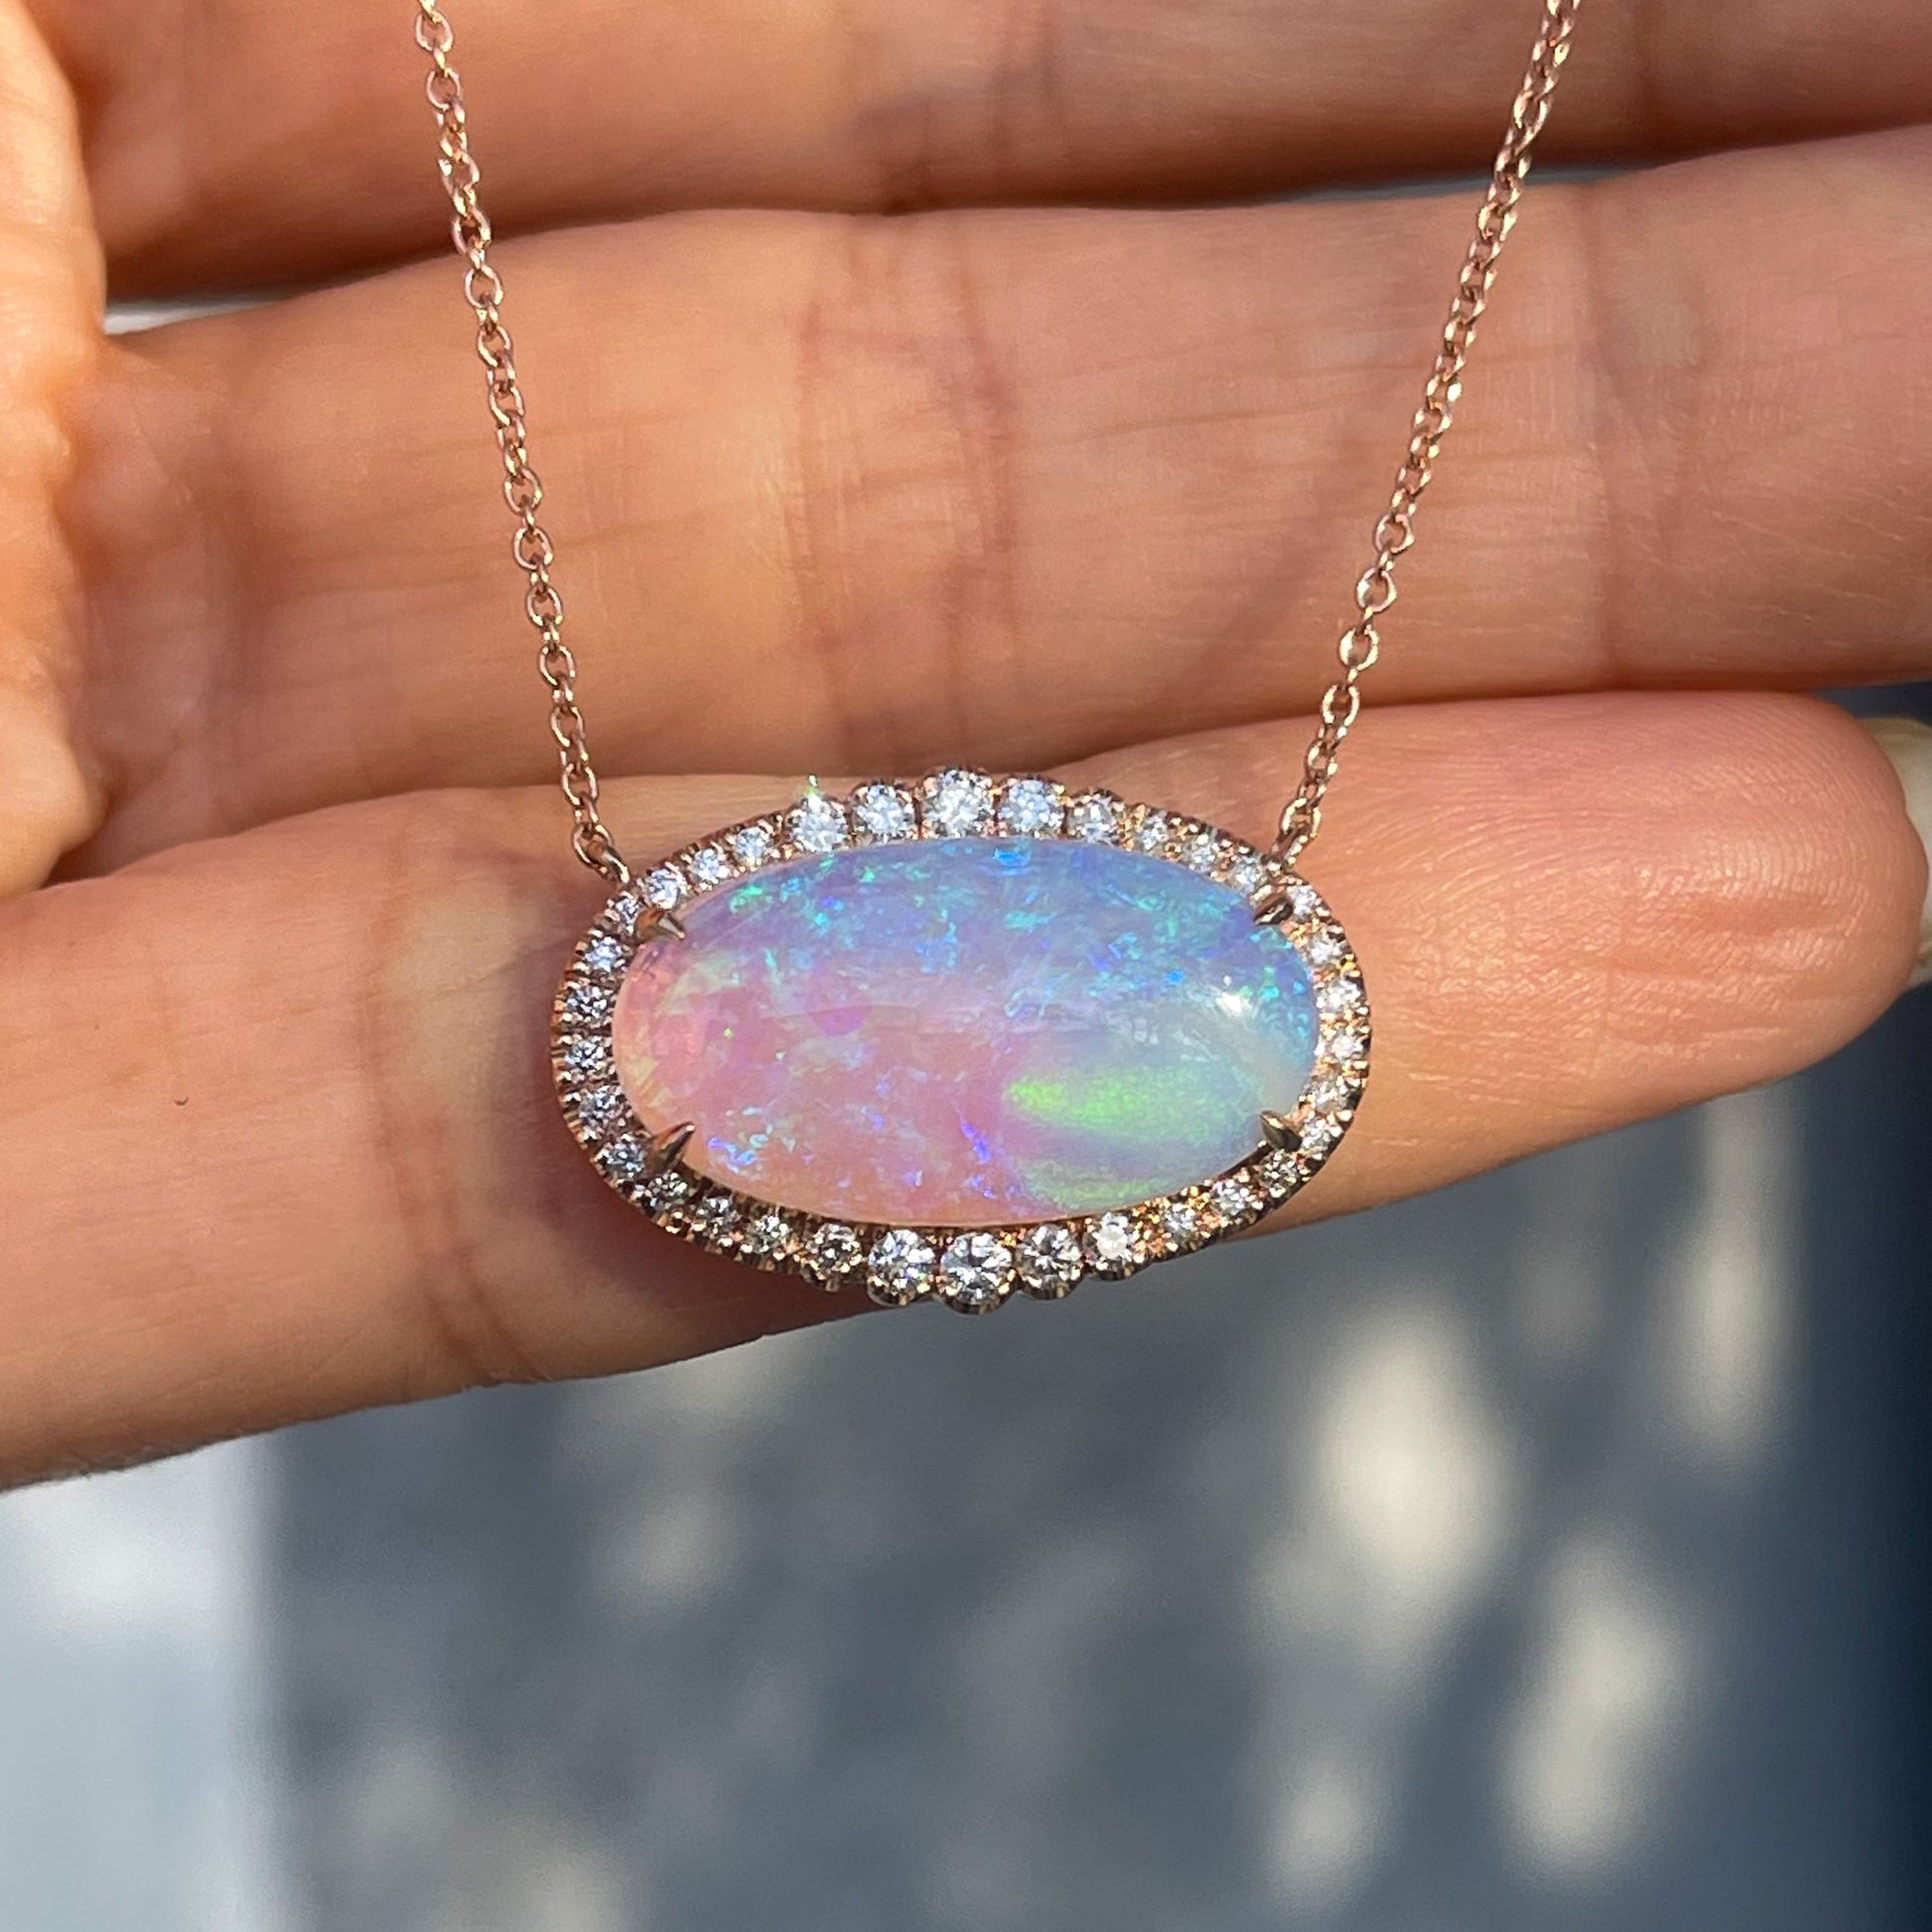 An Australian Opal Necklace by NIXIN Jewelry resting on a hand. The purple and blue opal necklace is set in 14k rose gold.